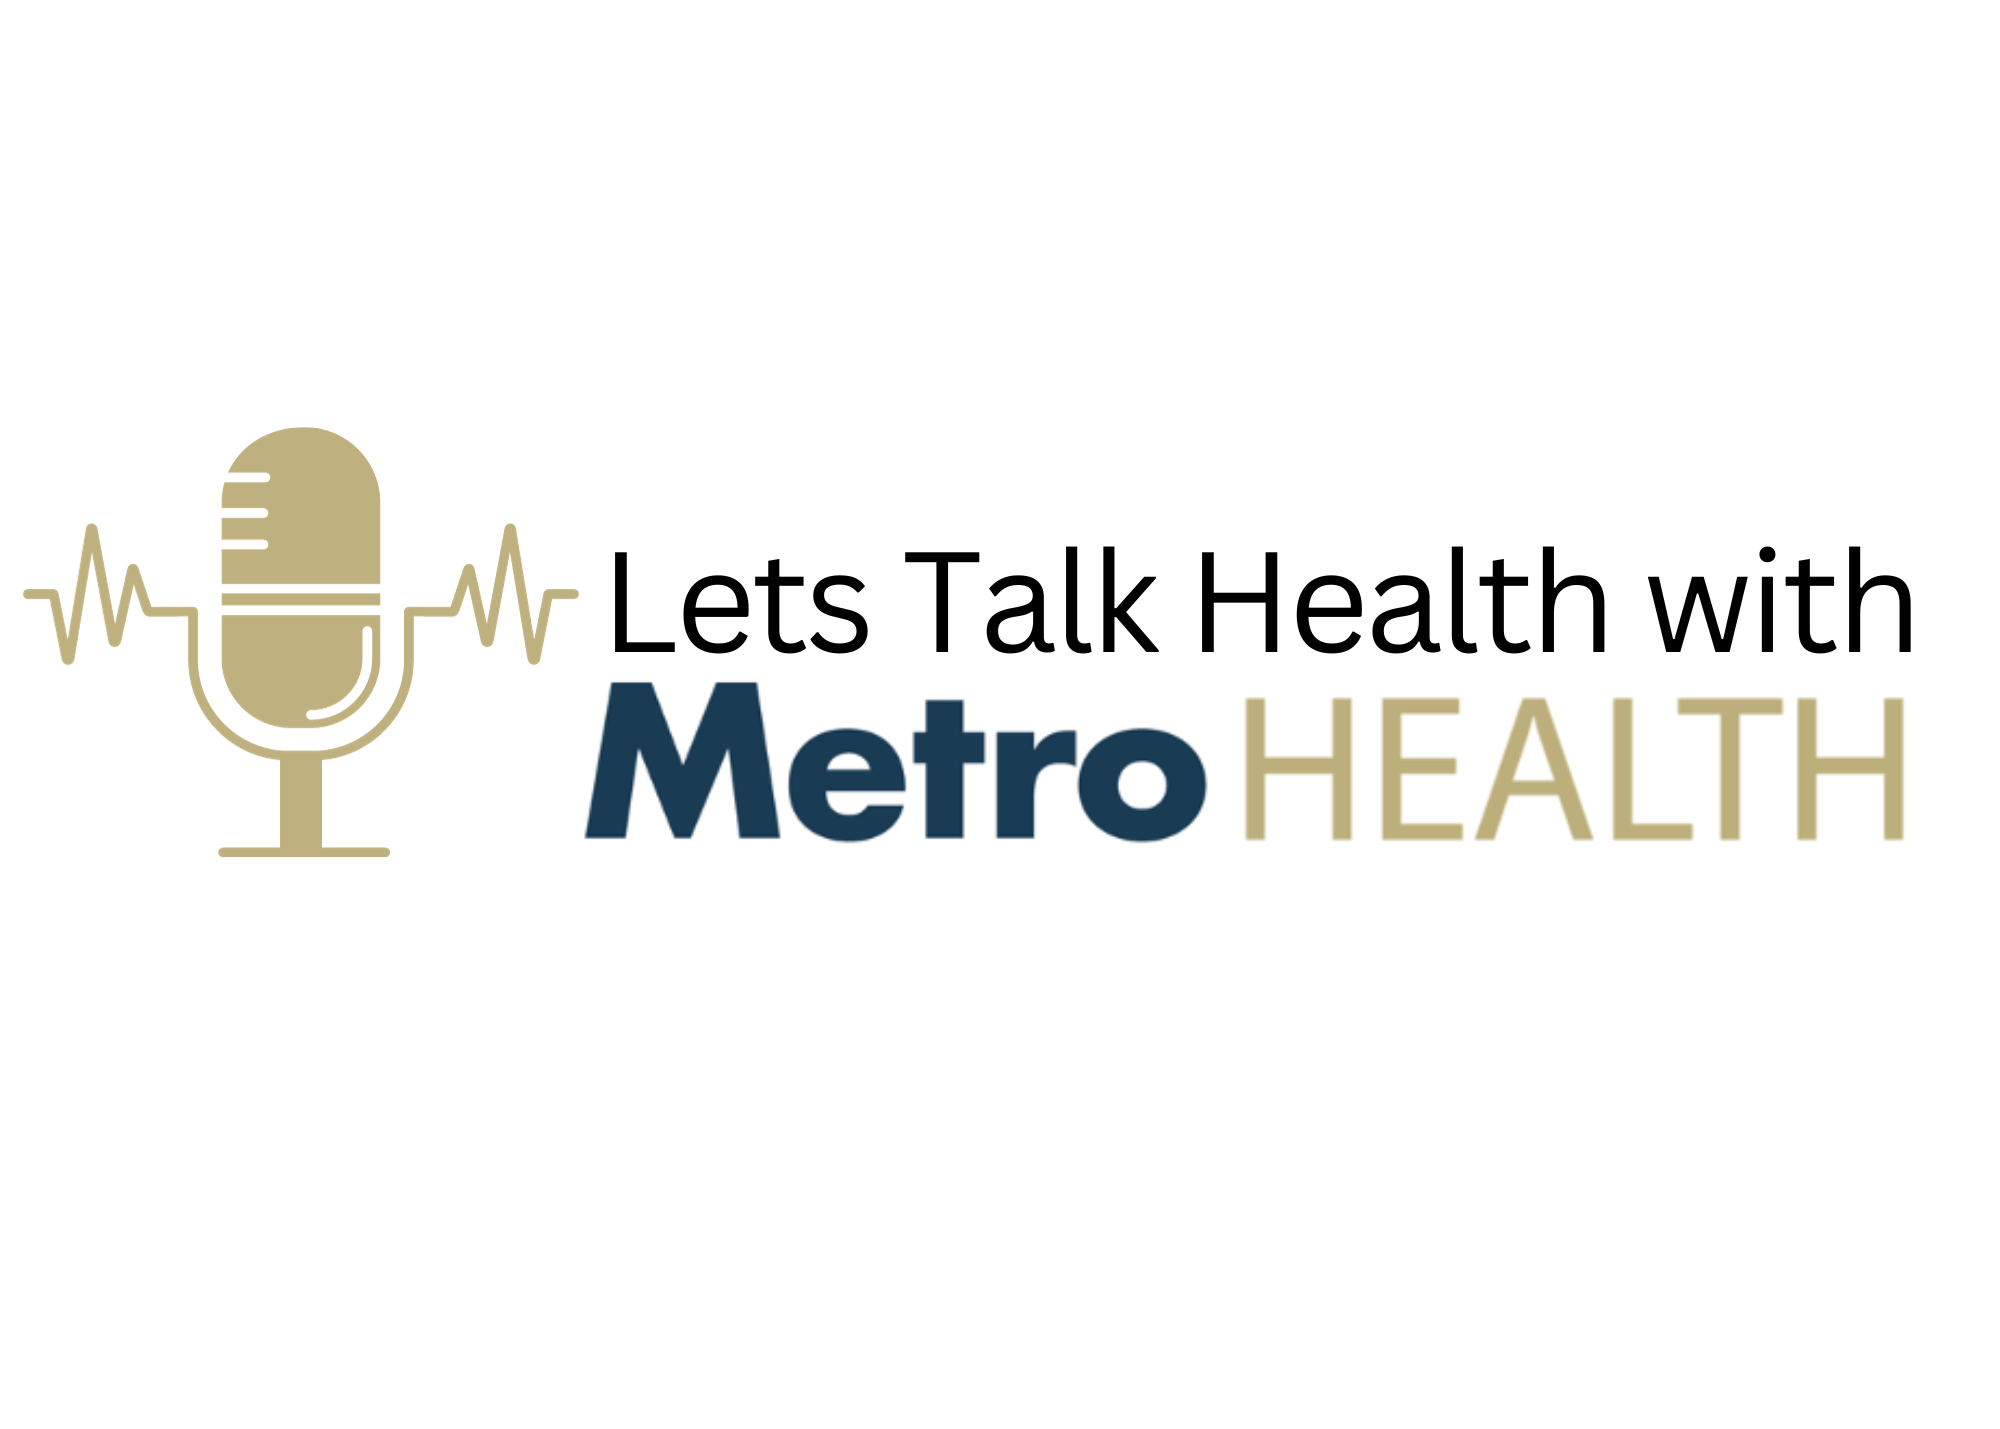 Metro Health Launches PodCast-Let’s Talk Health with Metro Health